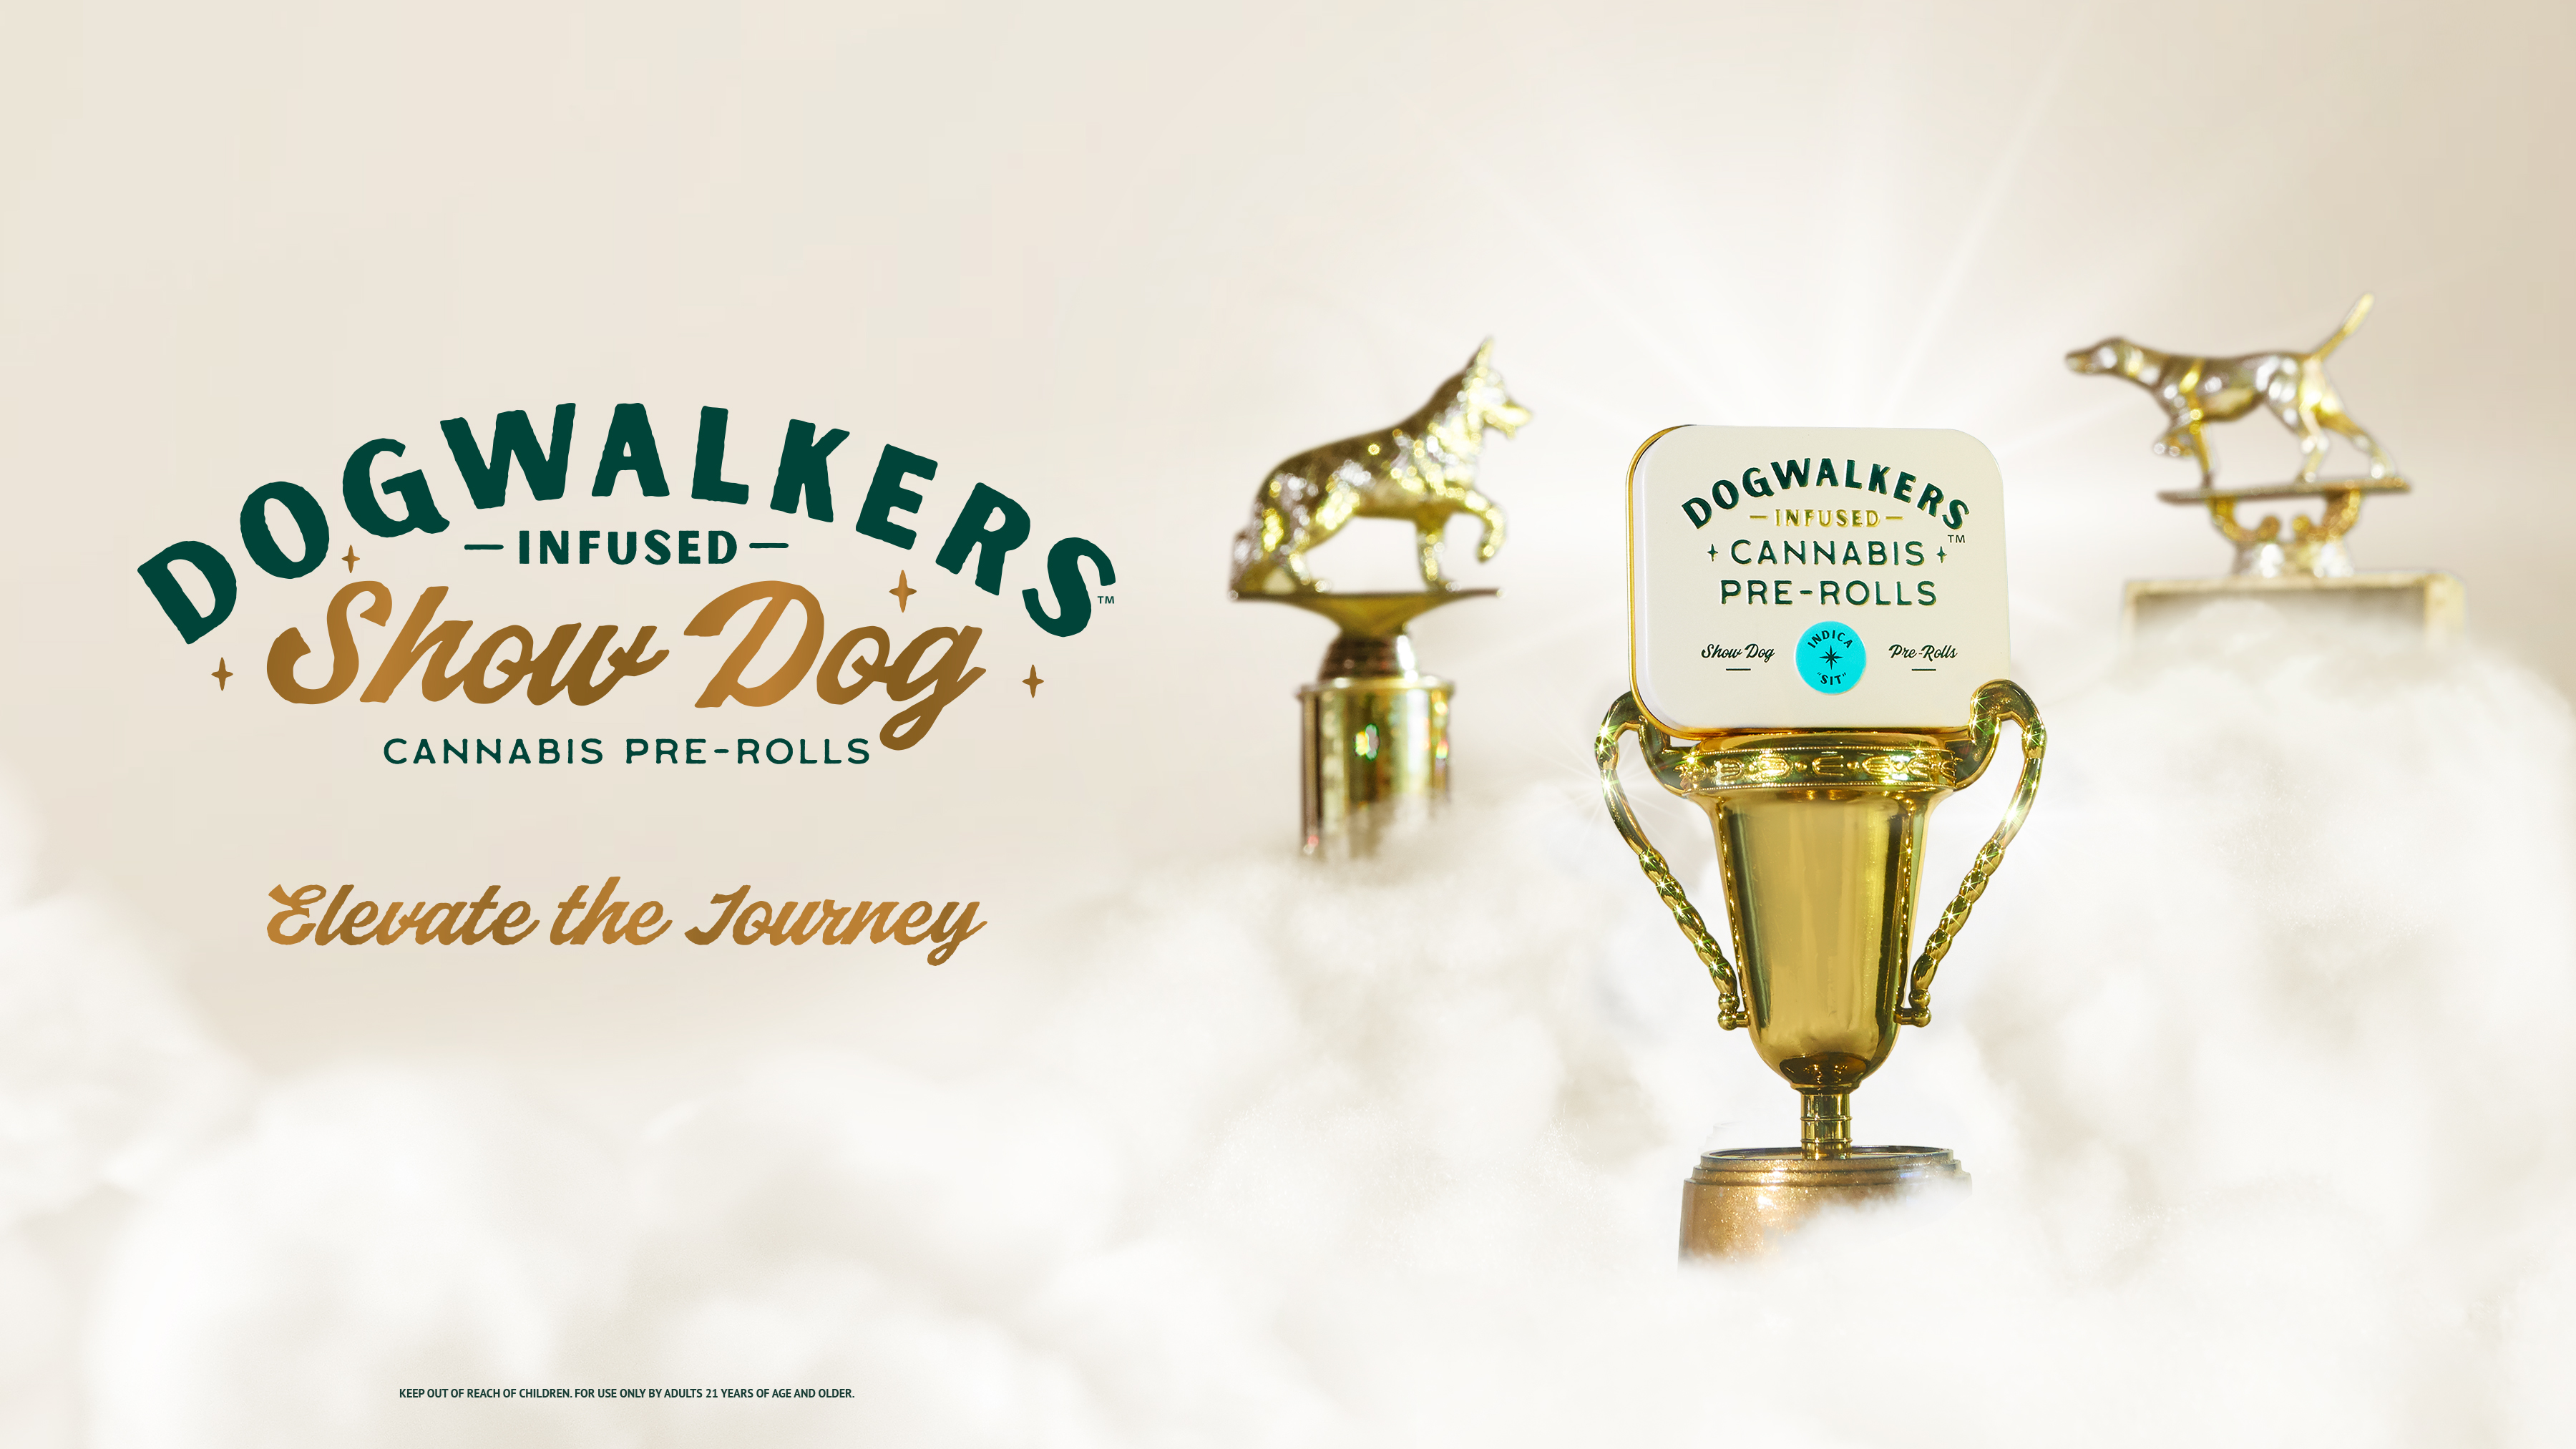 Dogwalkers Show Dog Infused Cannabis Pre-Rolls